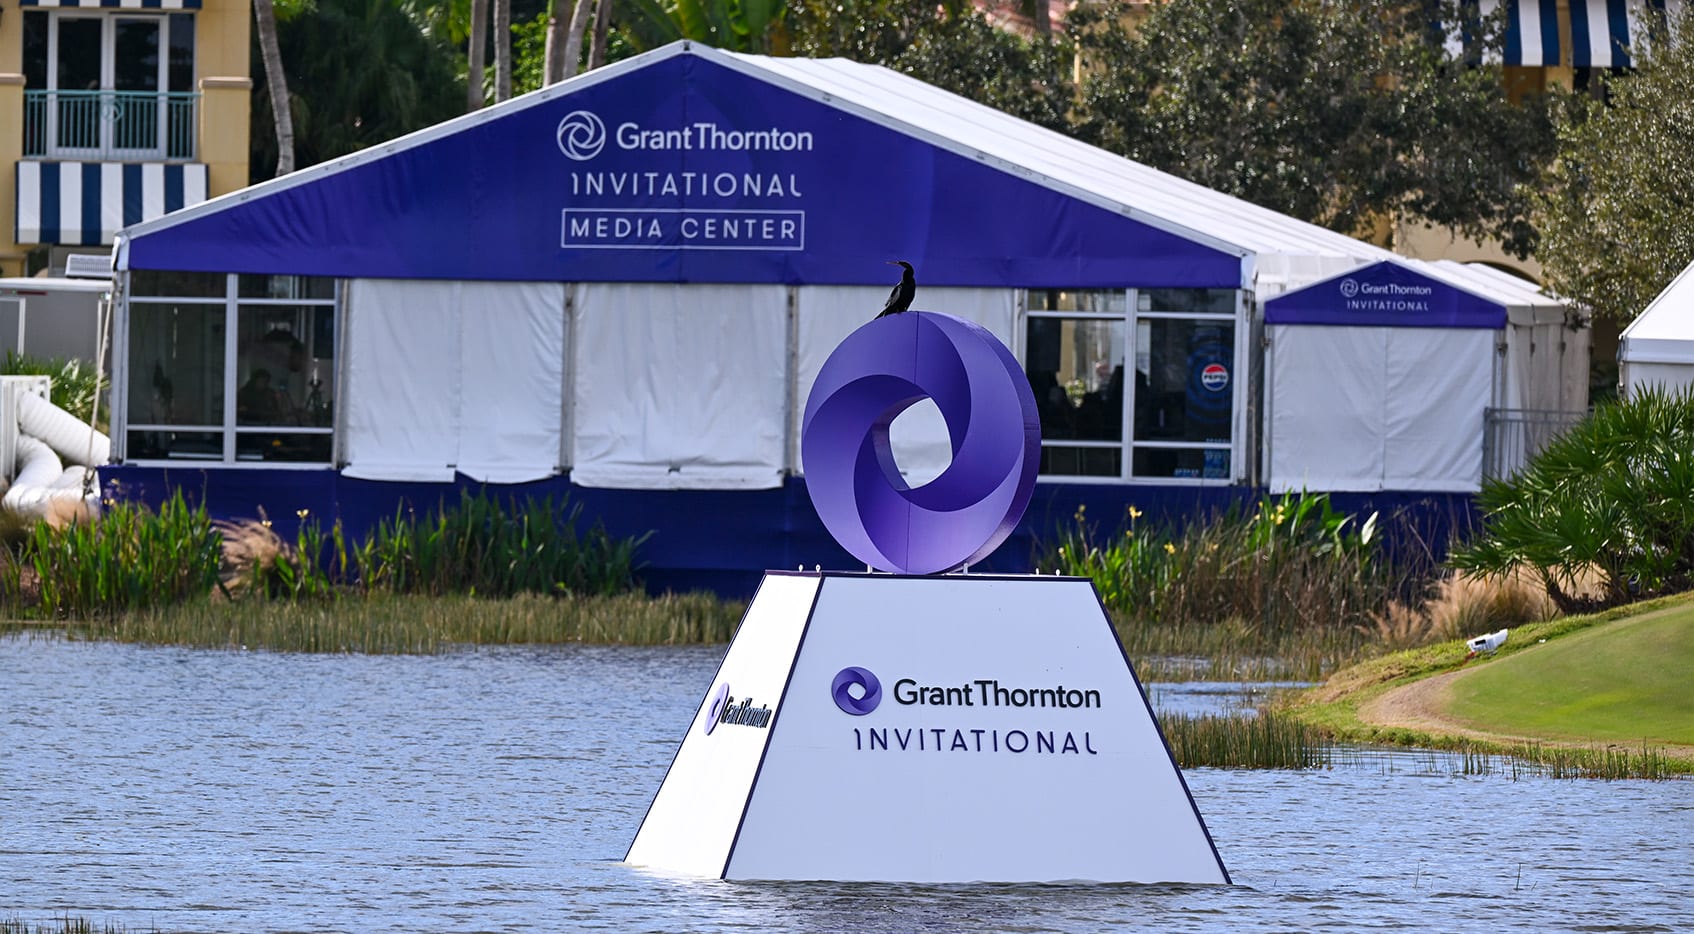 How to watch Grant Thornton Invitational, Round 3 Live scores, tee